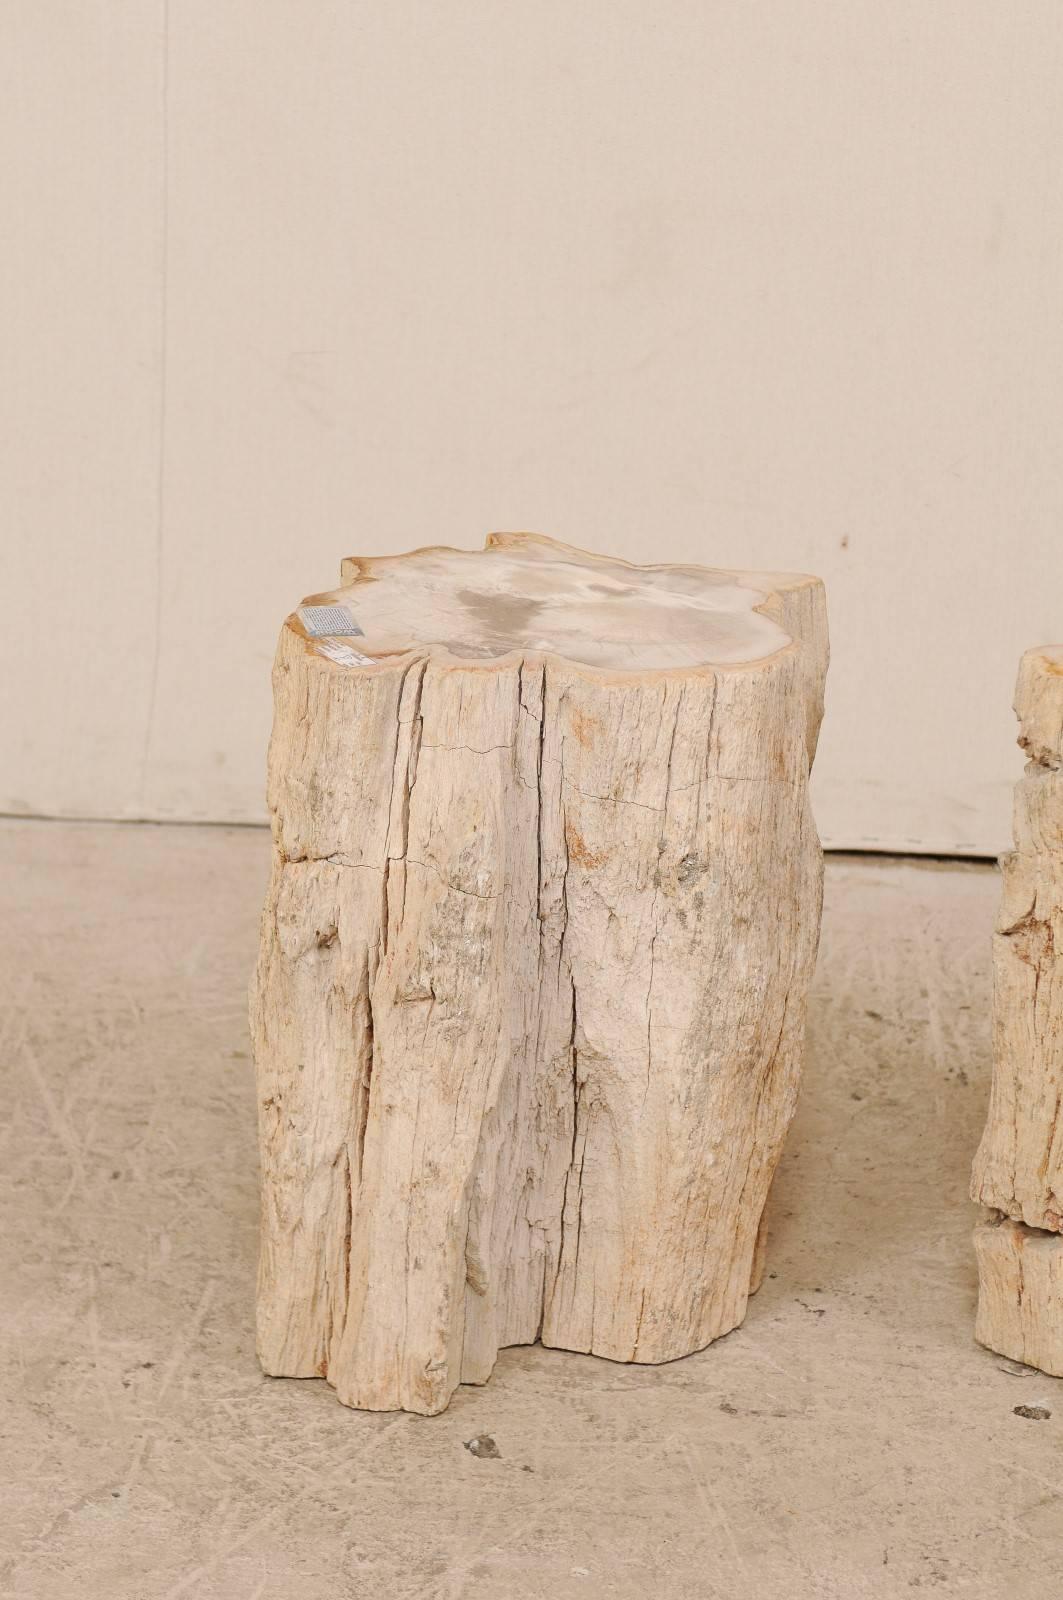 Rustic Pair of Live-Edge Petrified Wood Drink Tables With Polished Tops, Light Colored